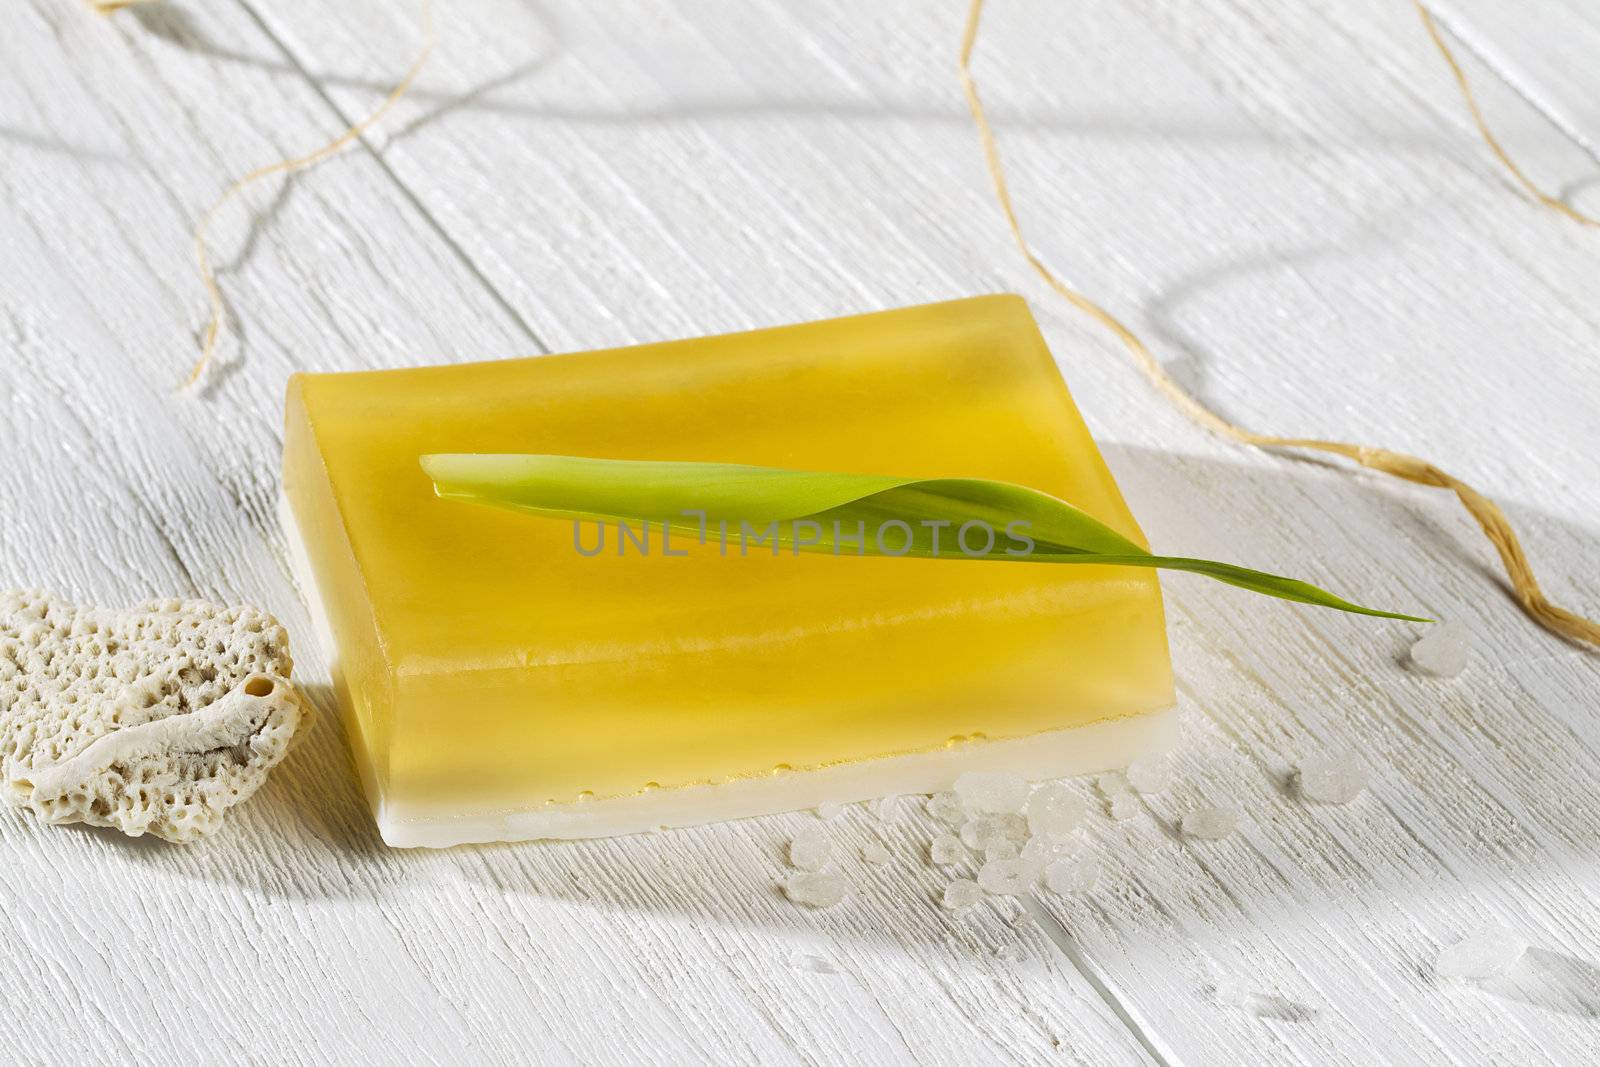 A close-up shot of a yellow bar soap on a white wooden background